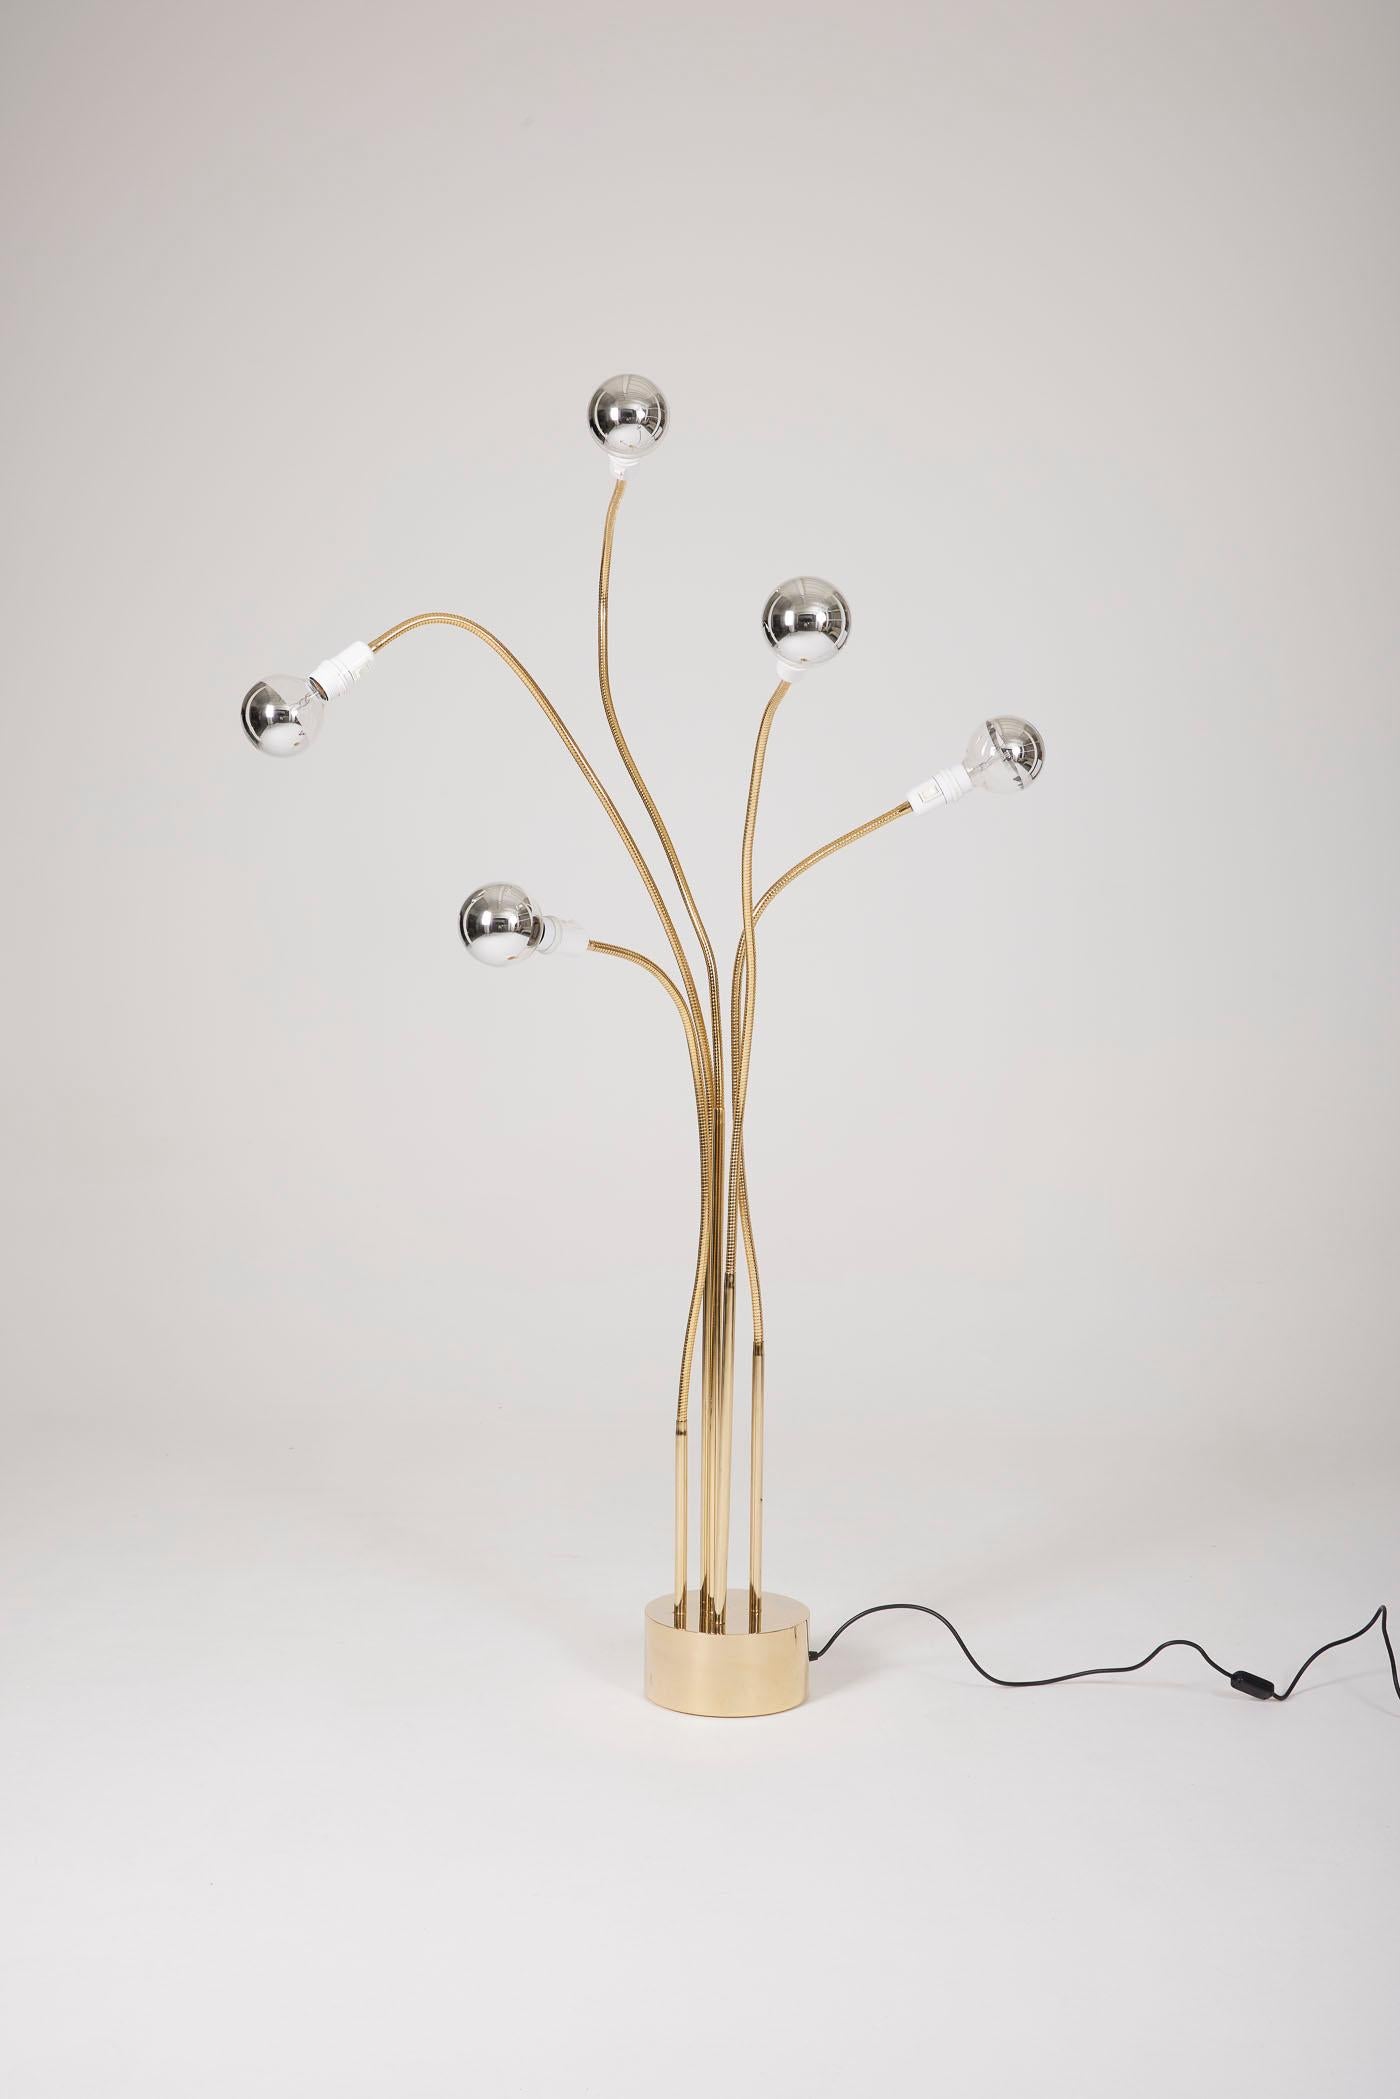 Floor lamp model F415, published by Saint Germain Lumière in the 1970s. It consists of five flexible light arms. Circular base in golden steel and arms in golden metal. Bulbs are included. In perfect condition.
DV485